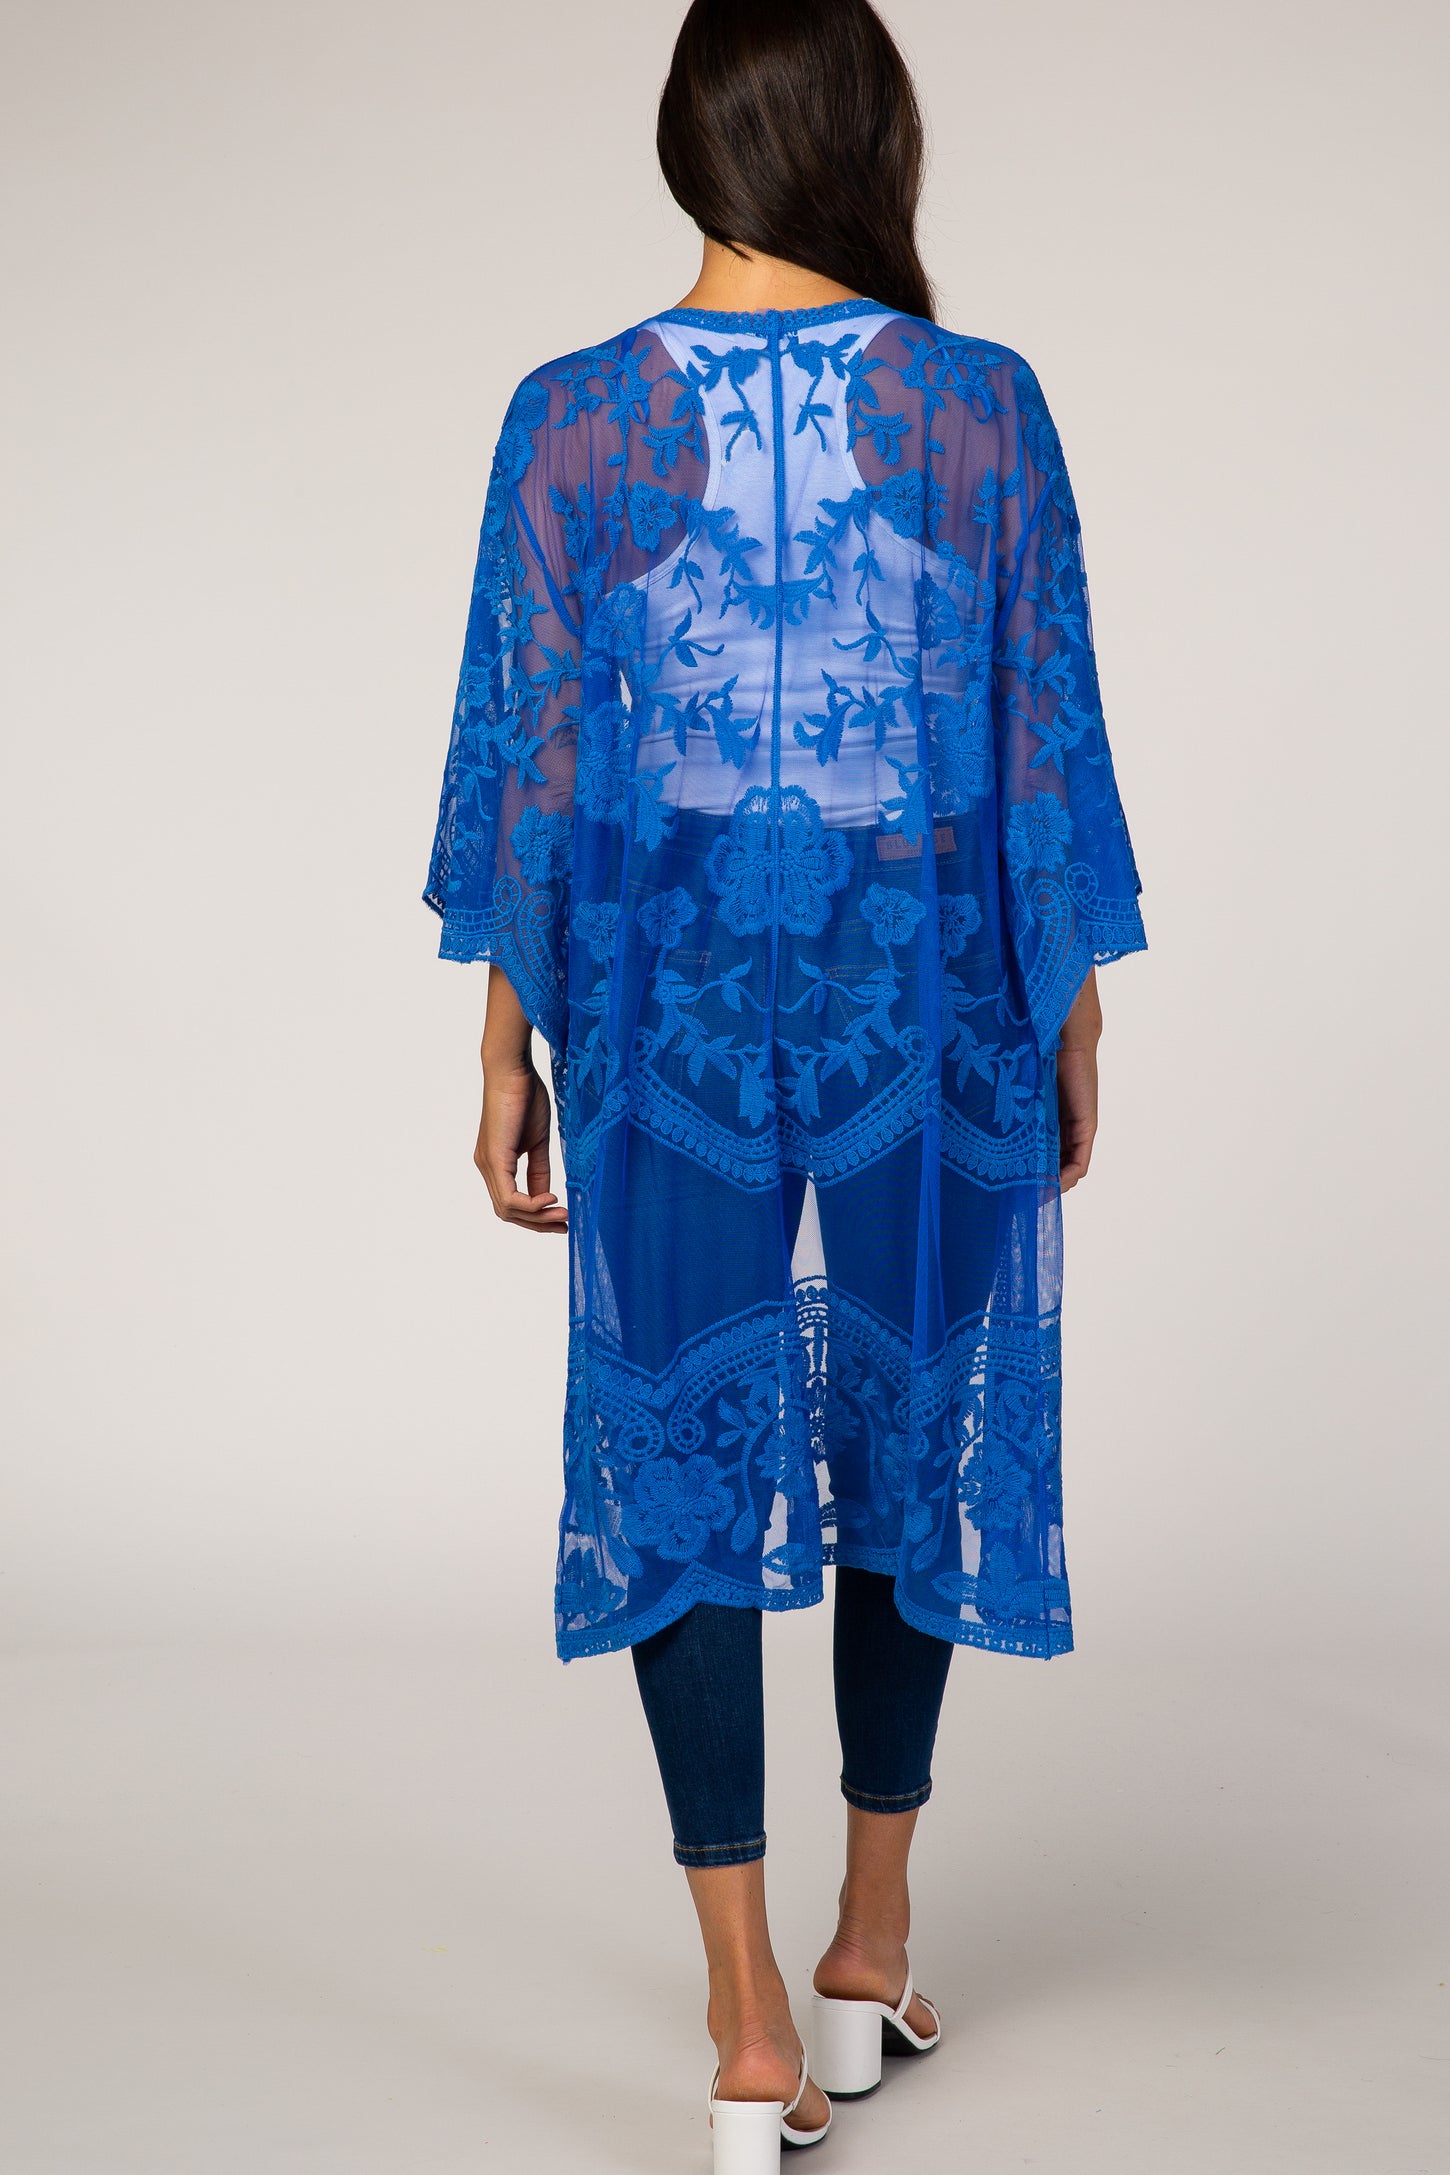 Royal Blue Mesh Lace Cover Up